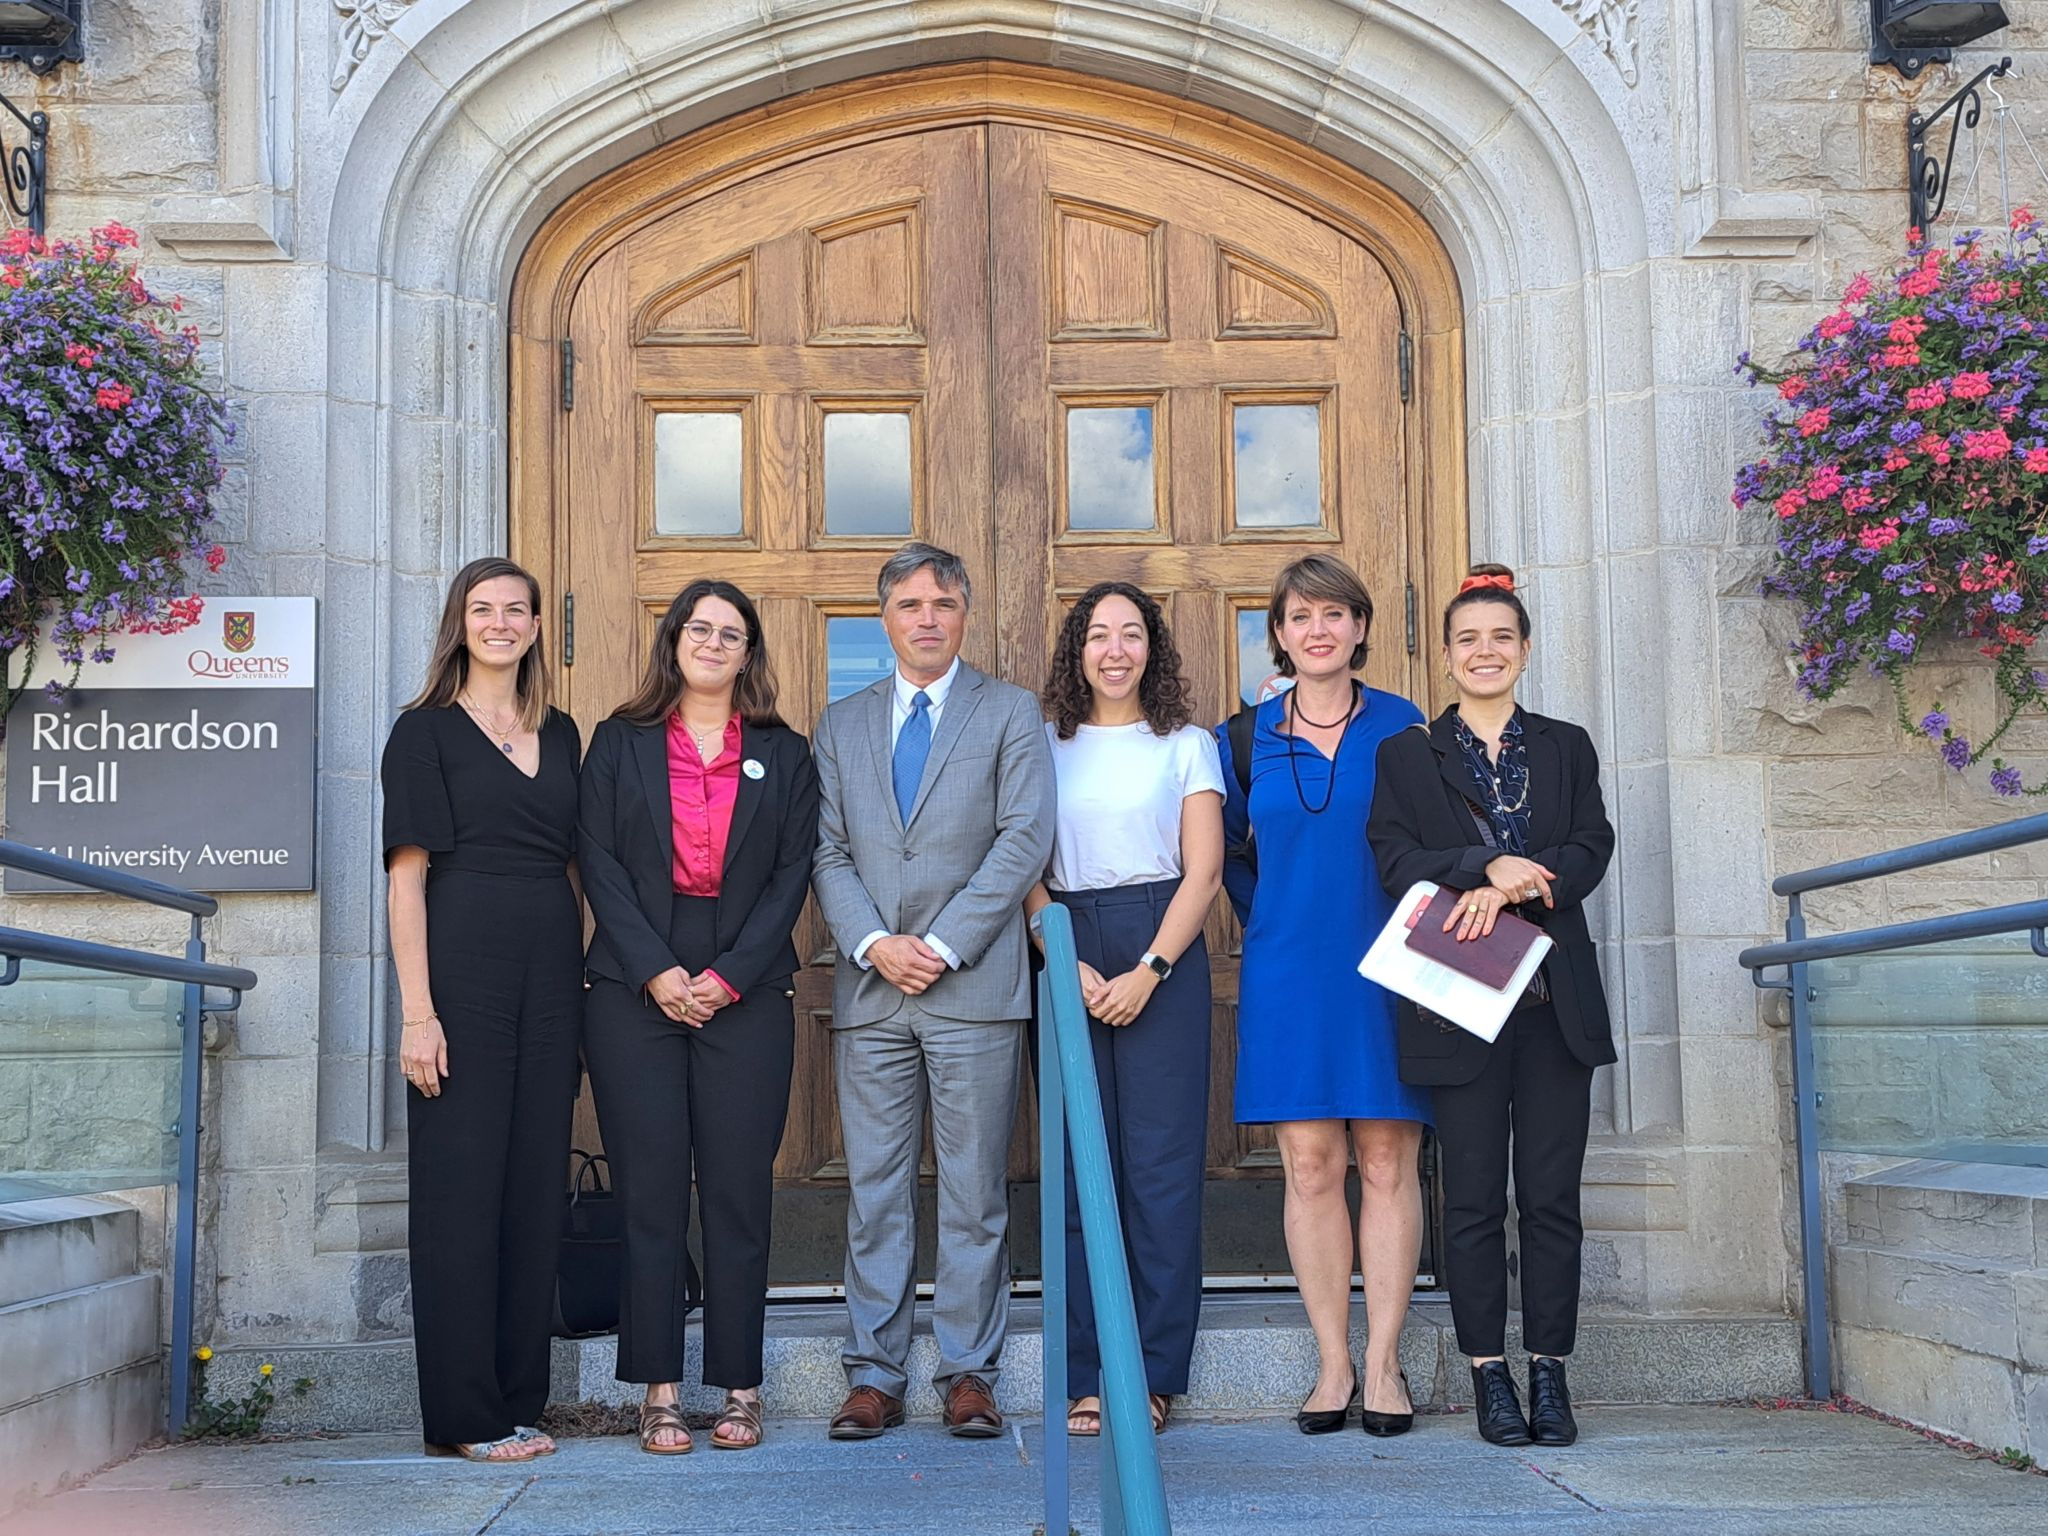 Photo of Visitors of French Embassy and Queen's University Staff outside Richardson Hall